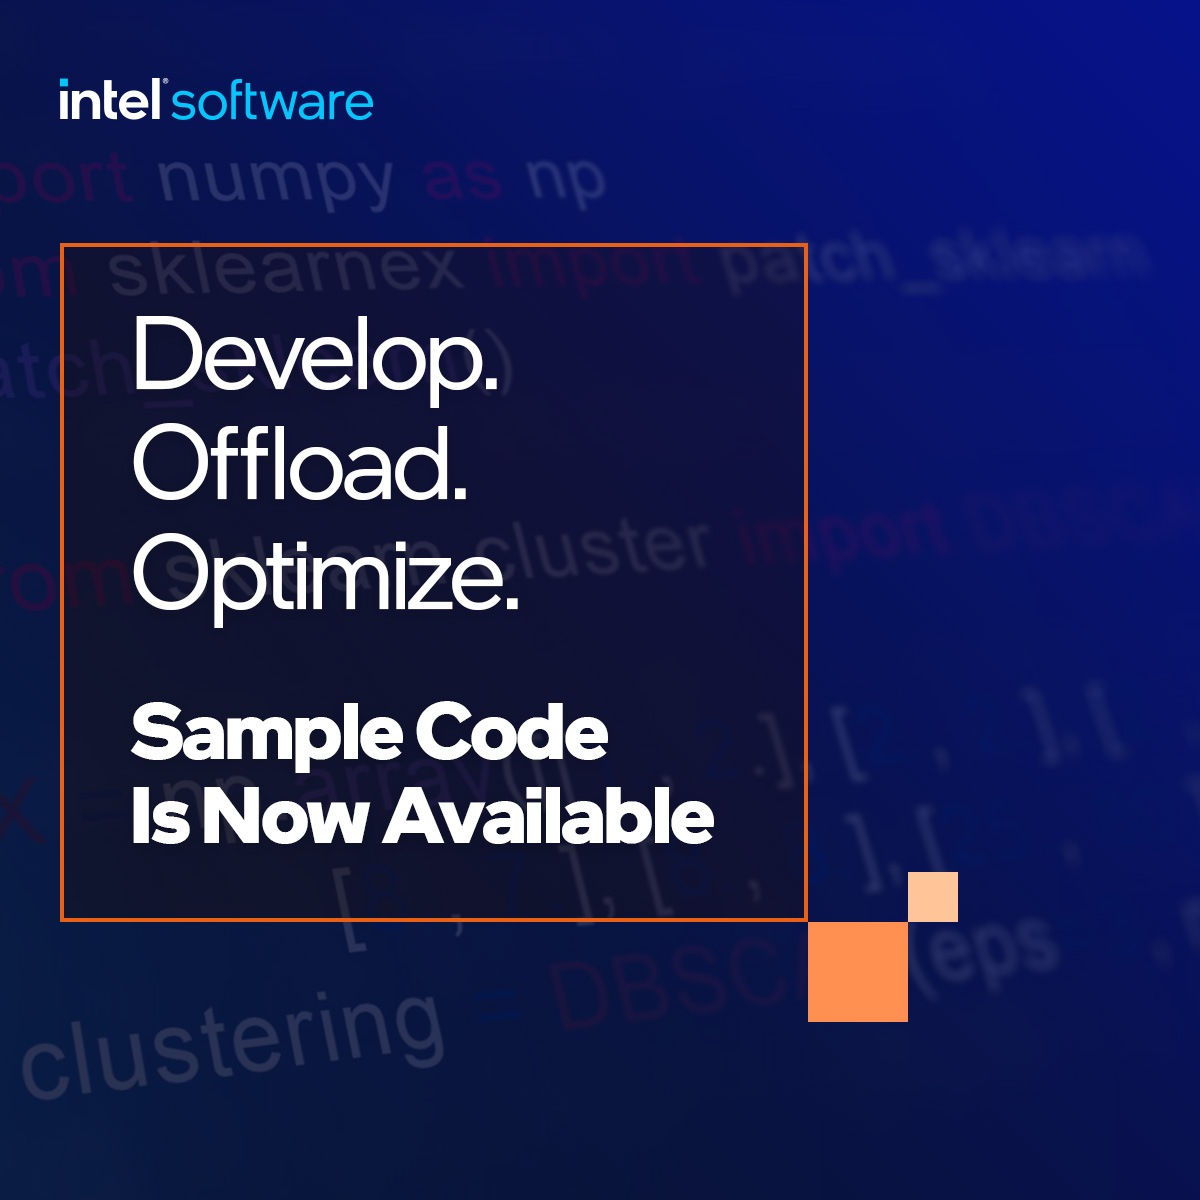 Explore the catalog of #oneAPI code samples directly from @github, all in one place covering topics such as CUDA migration, #AI, #HPC, and #rendering samples. How will you put them to use? intel.ly/3MHm29l